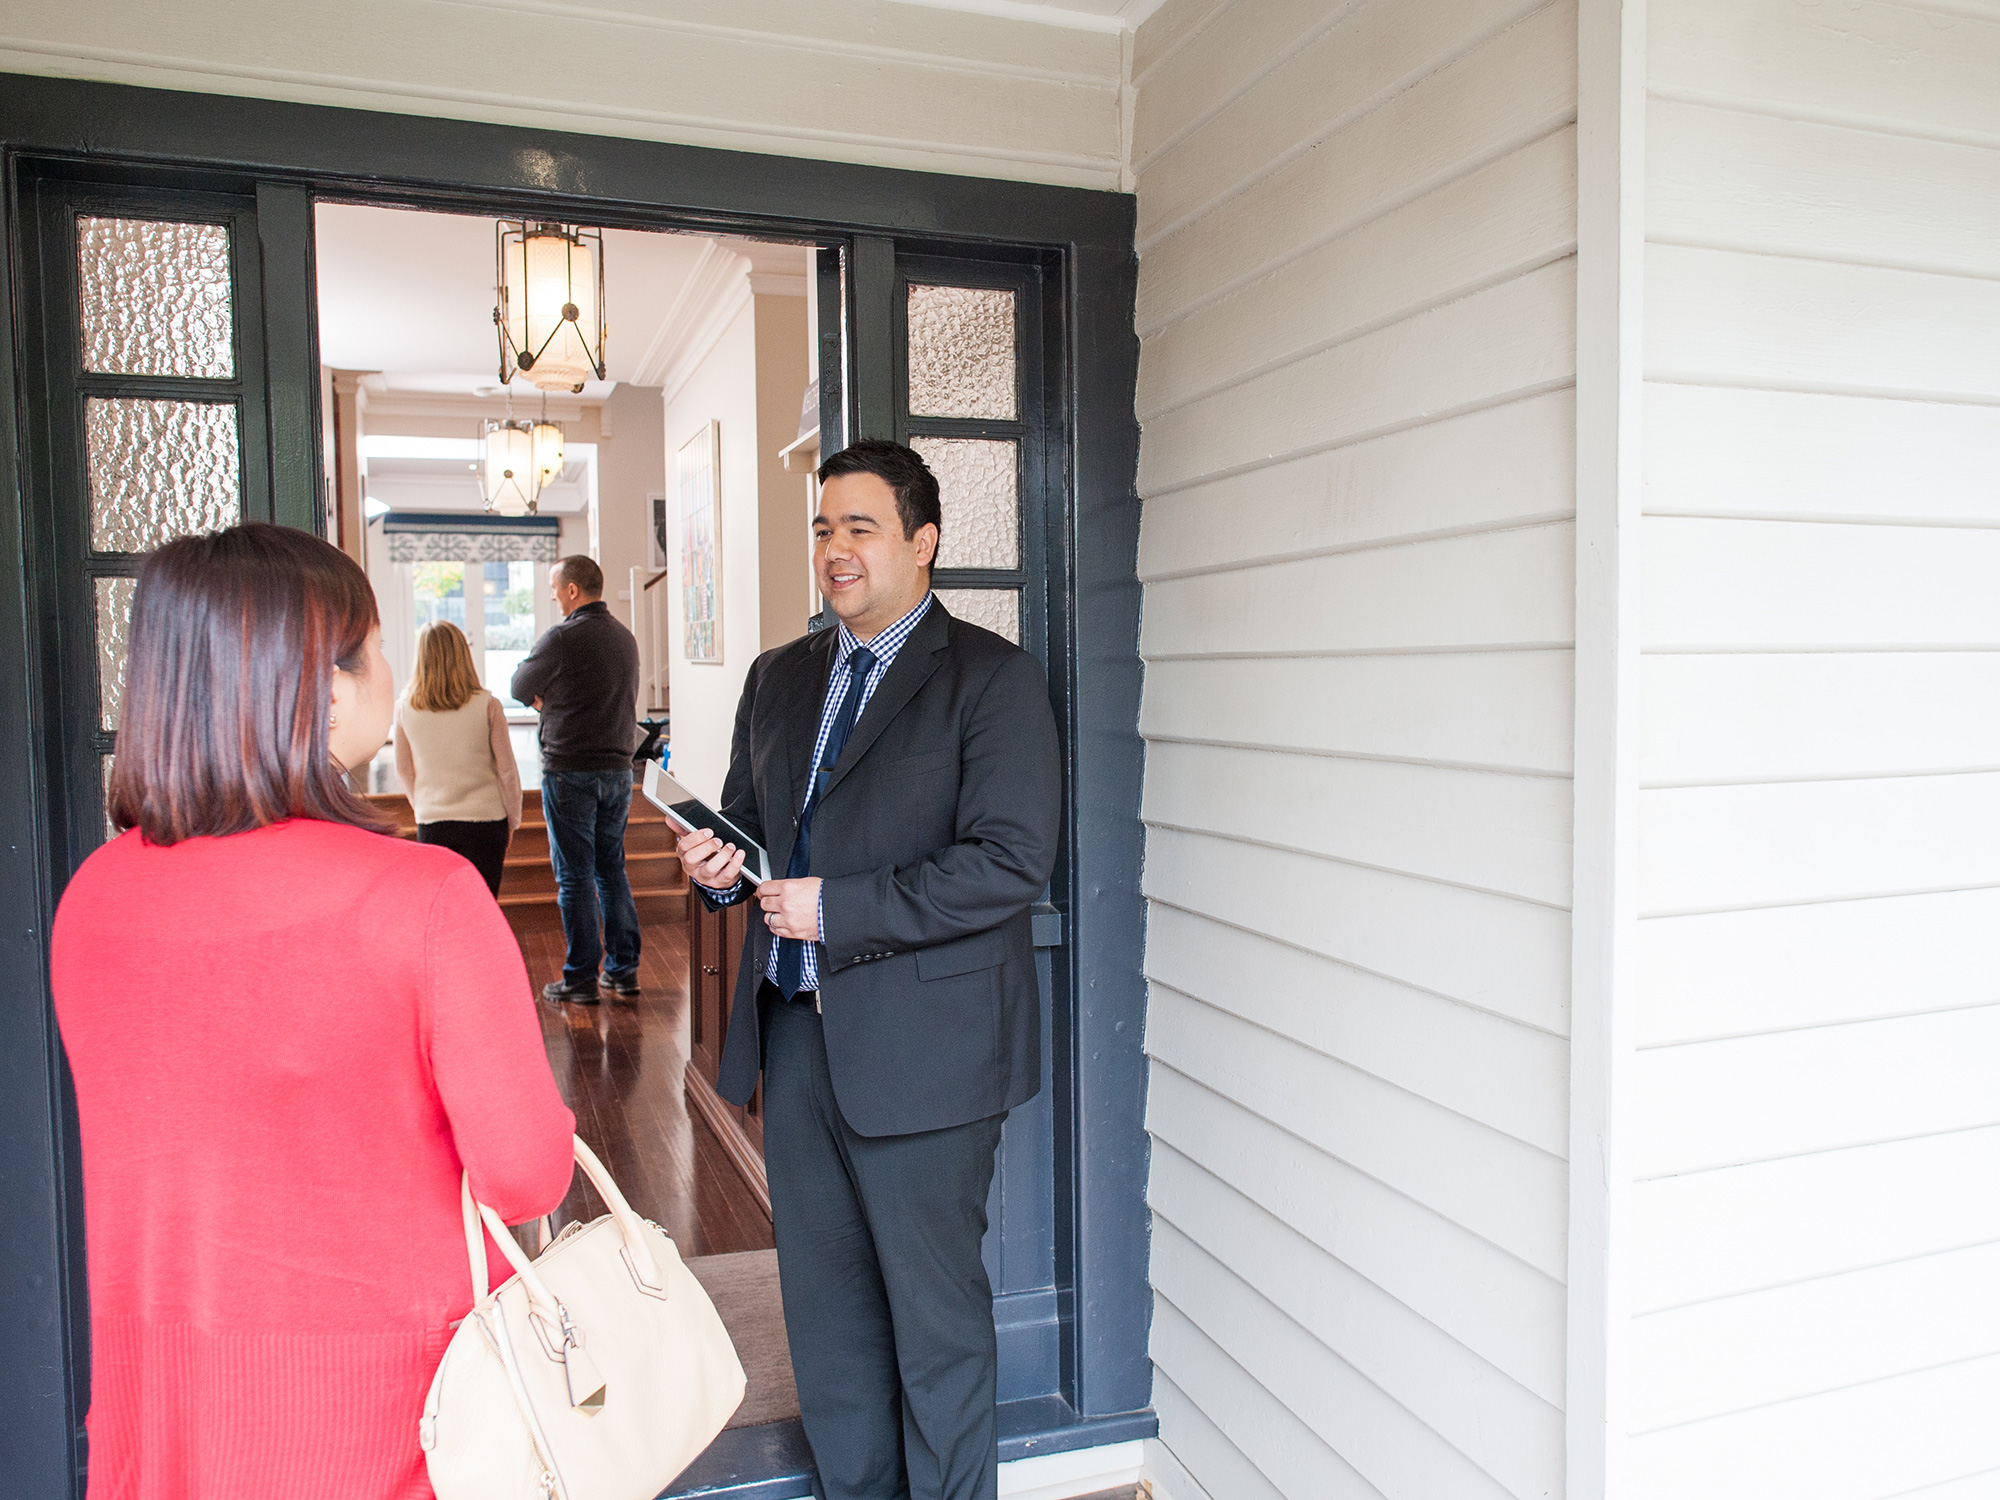 Meet and greet – what to say to real estate agents